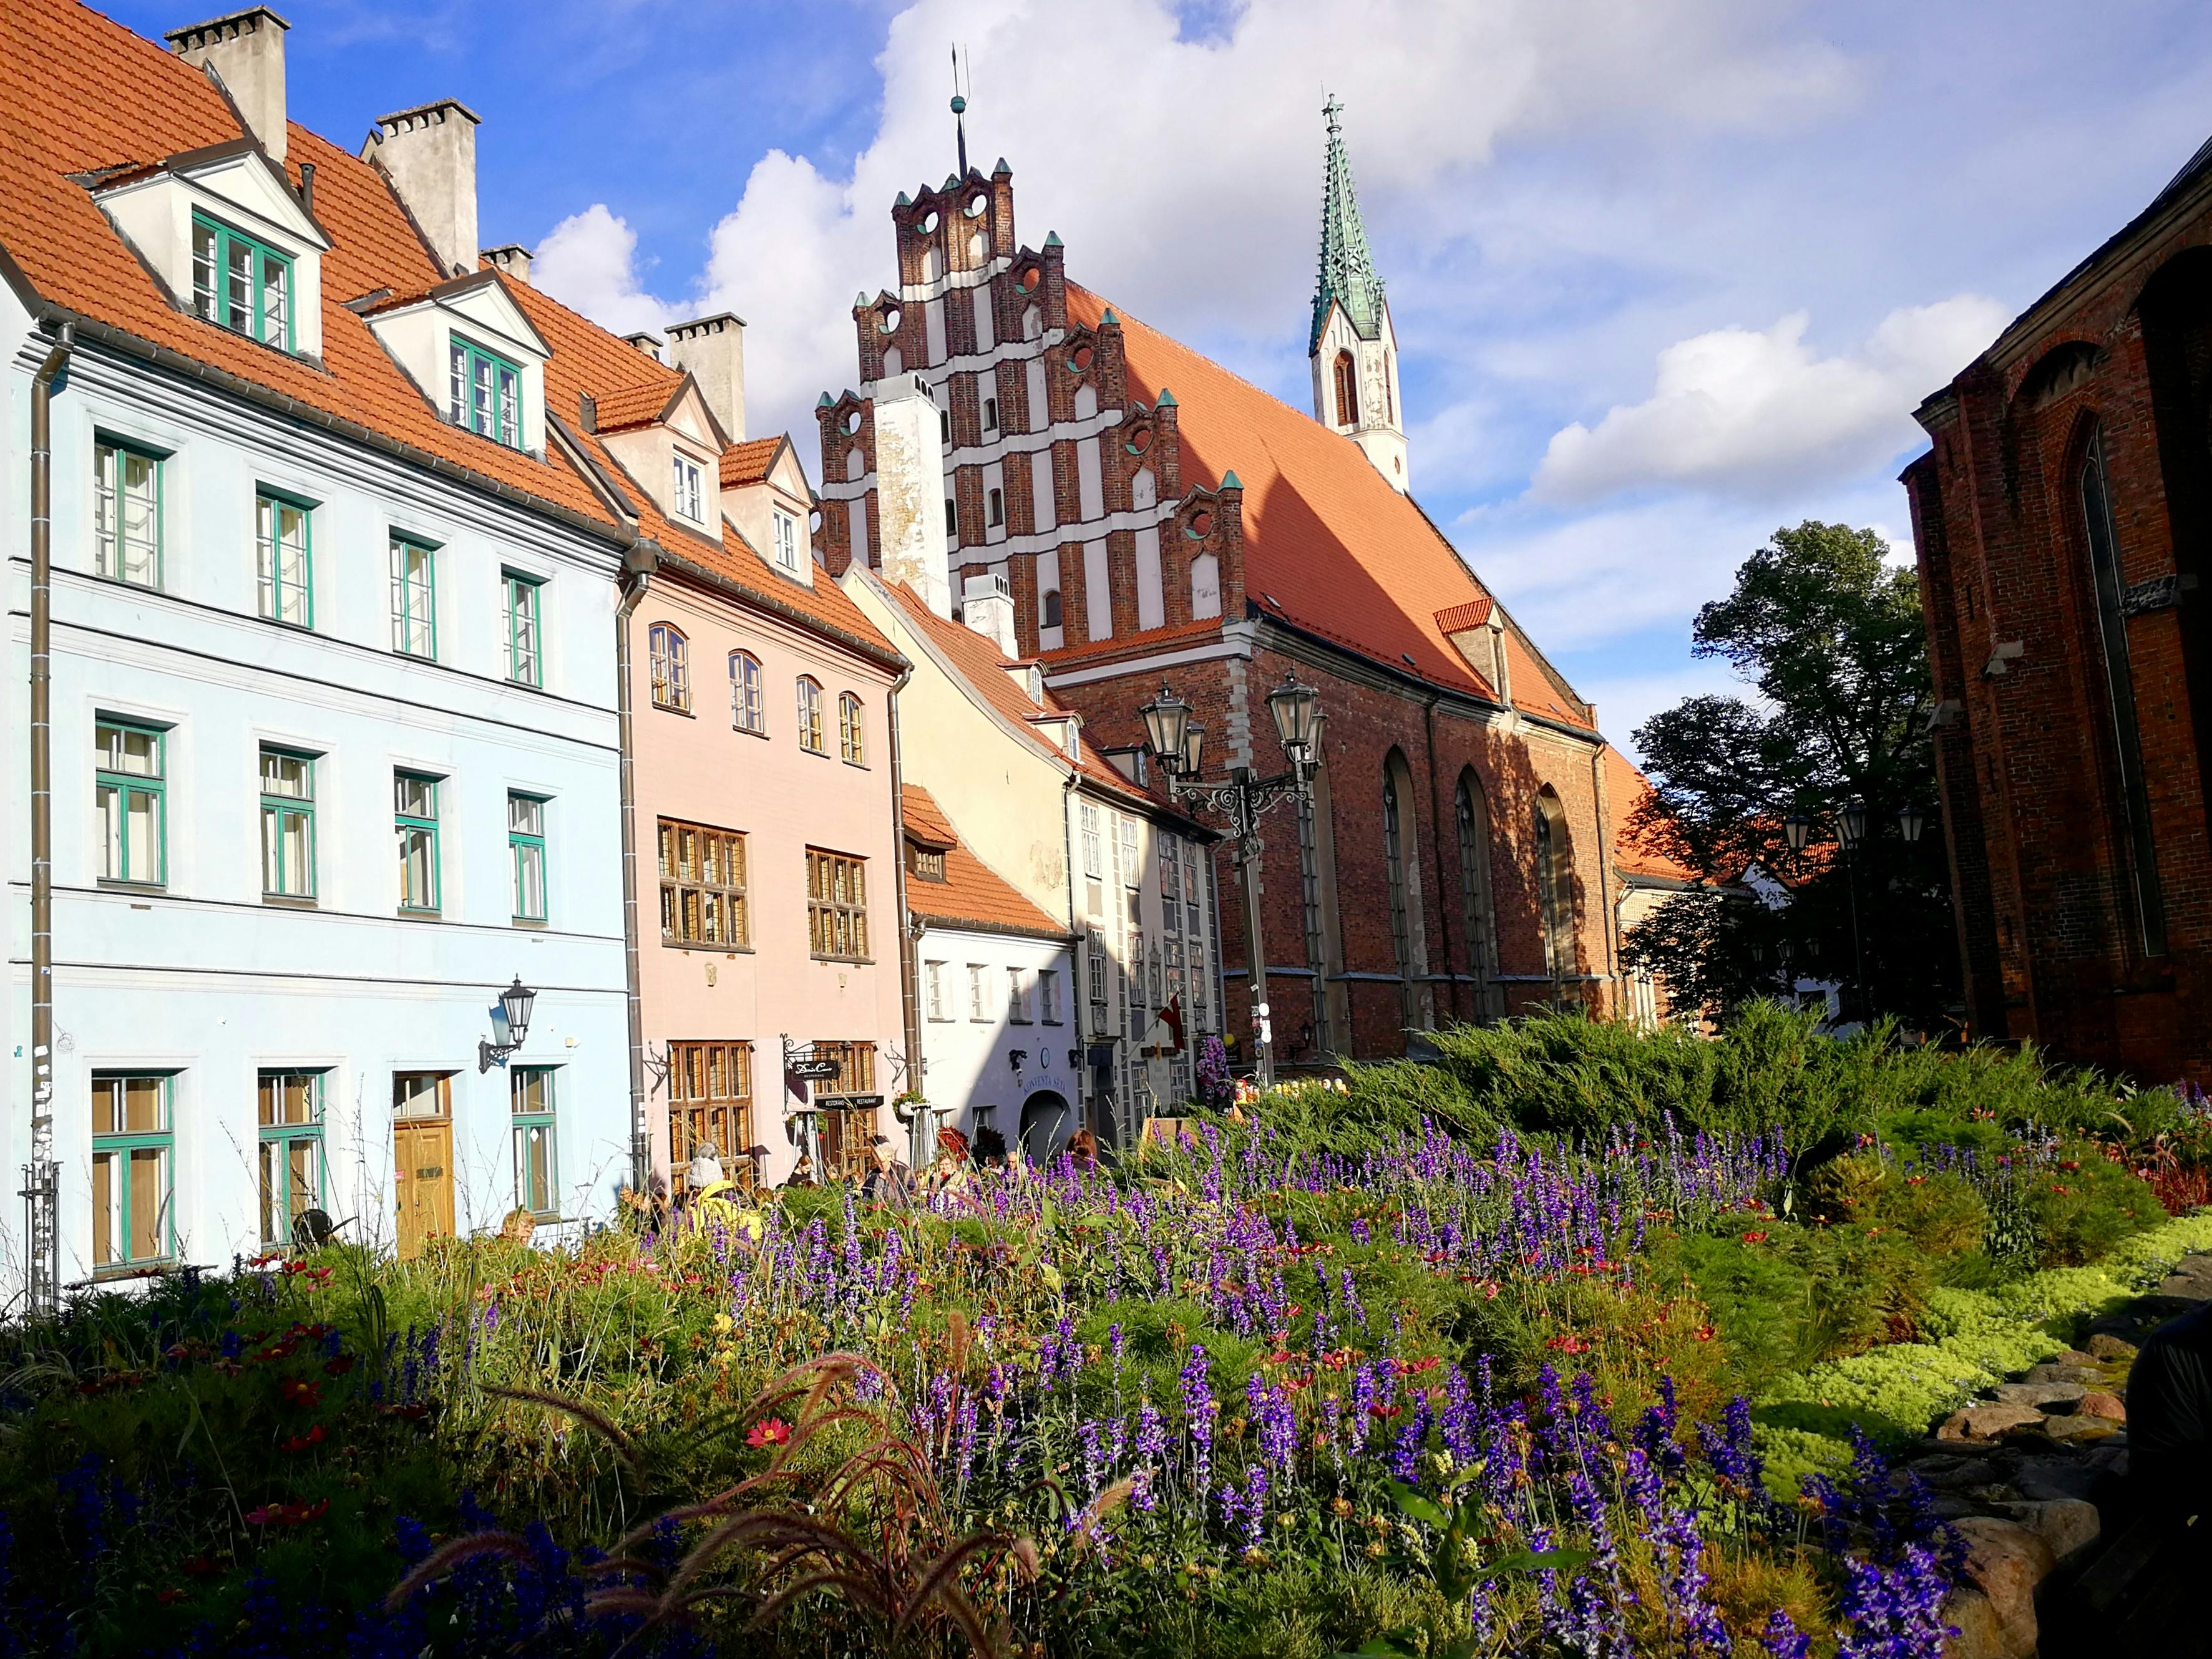 Self-guided discovery walk in Riga - the essential old town and its secrets